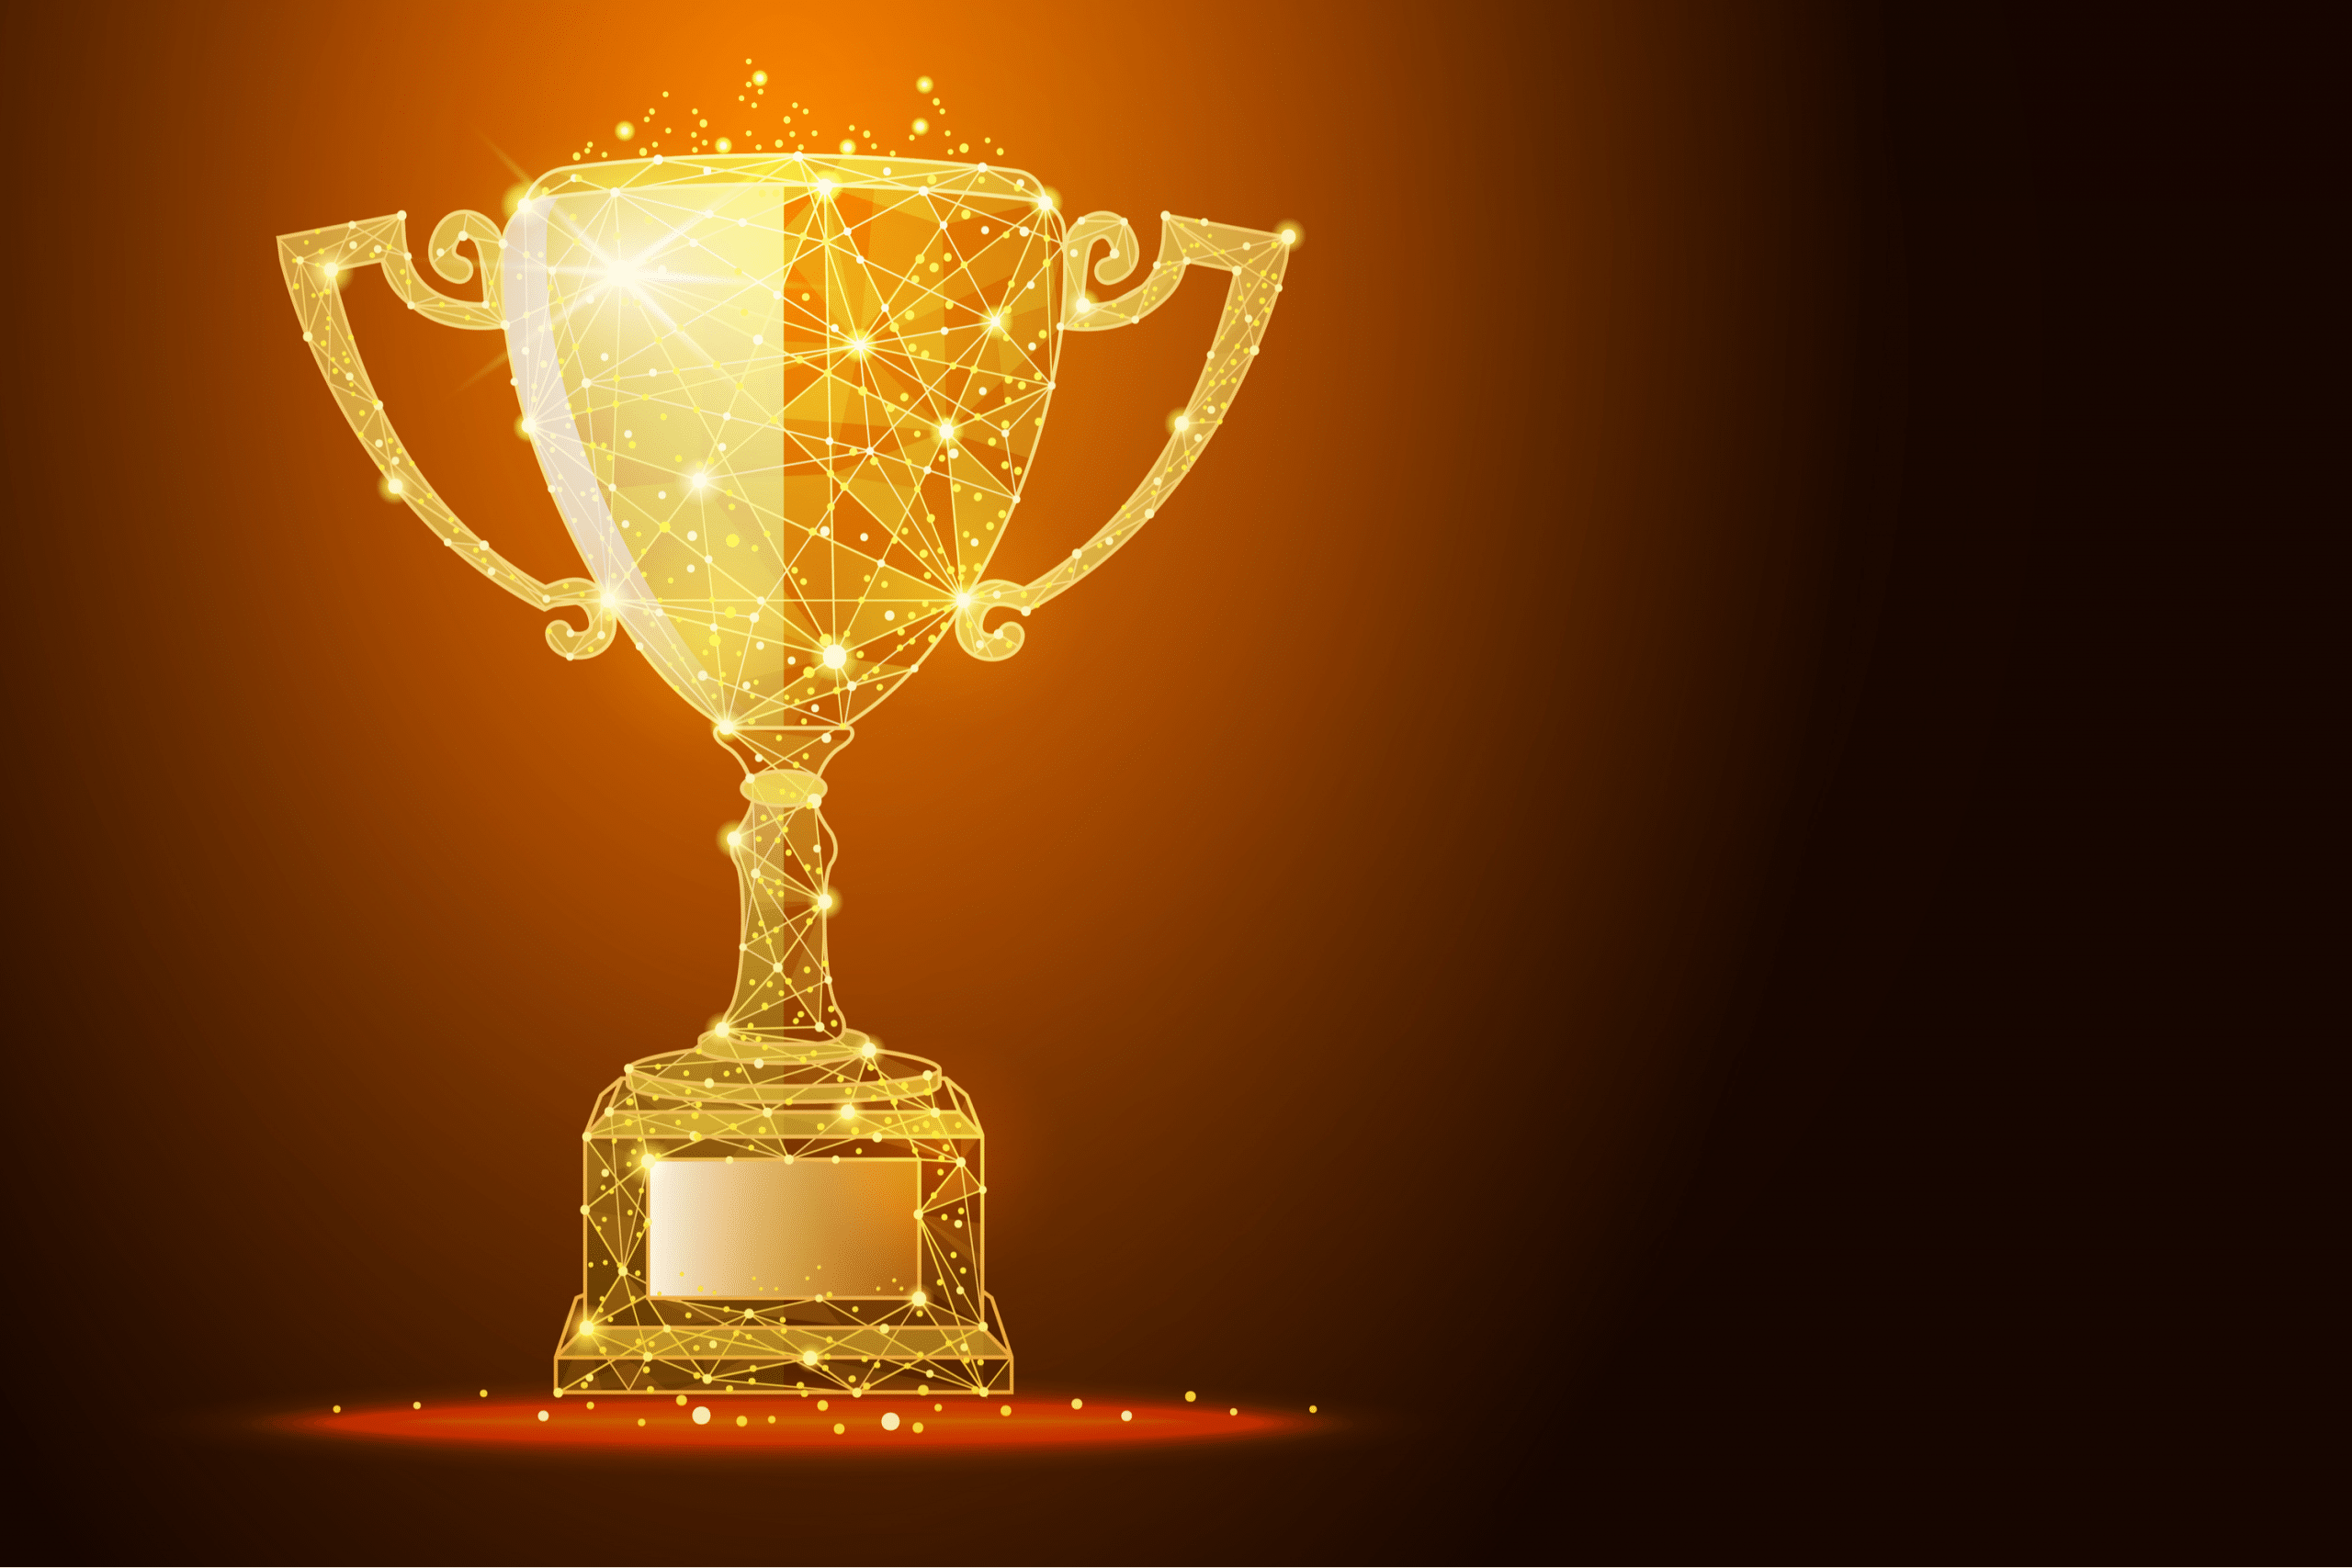 Award Cups background